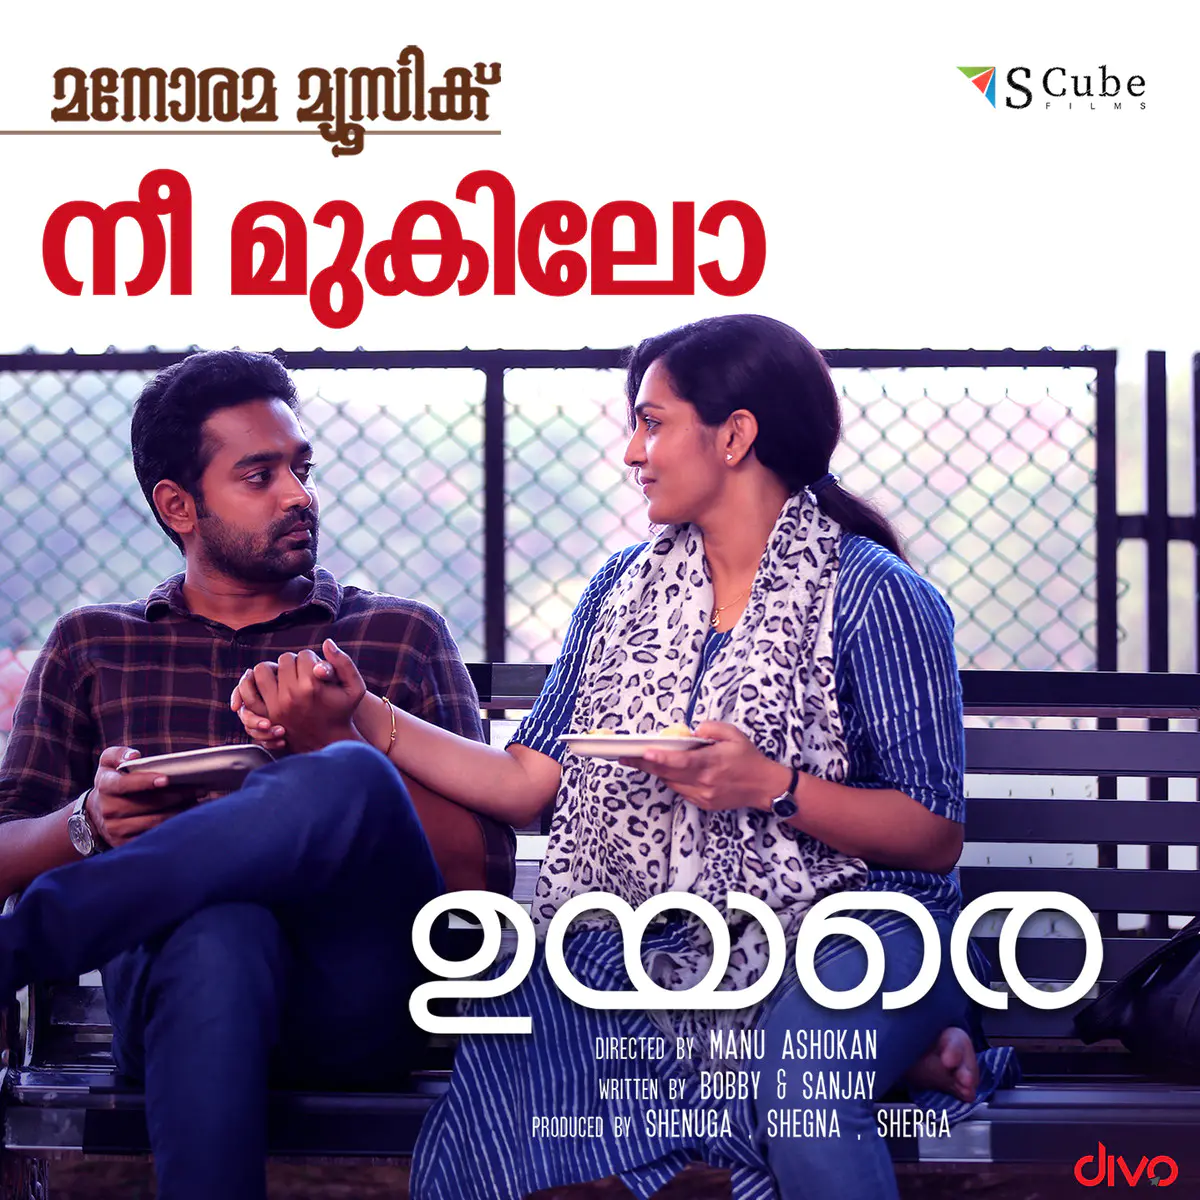 Nee Mukilo Lyrics In Malayalam Uyare Nee Mukilo Song Lyrics In English Free Online On Gaana Com Also, get their true english translations that can prove vital if you find it difficult to. uyare nee mukilo song lyrics